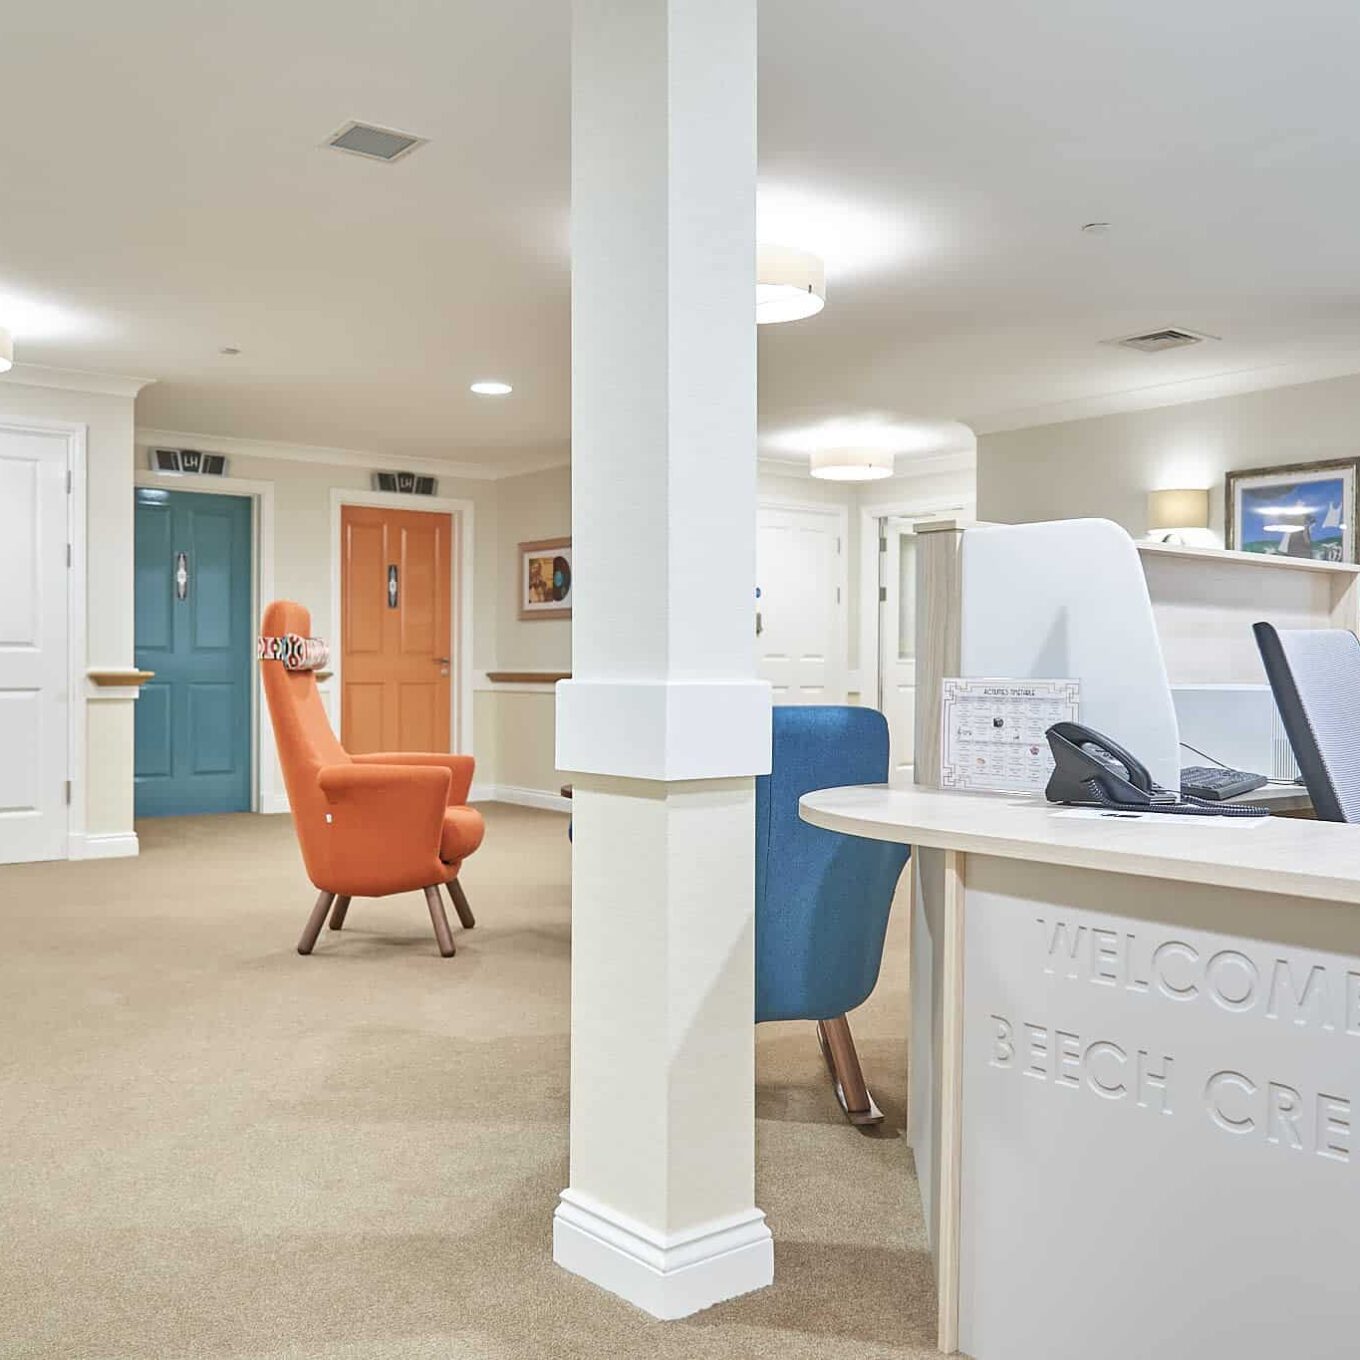 Reception area and desk at Care Home